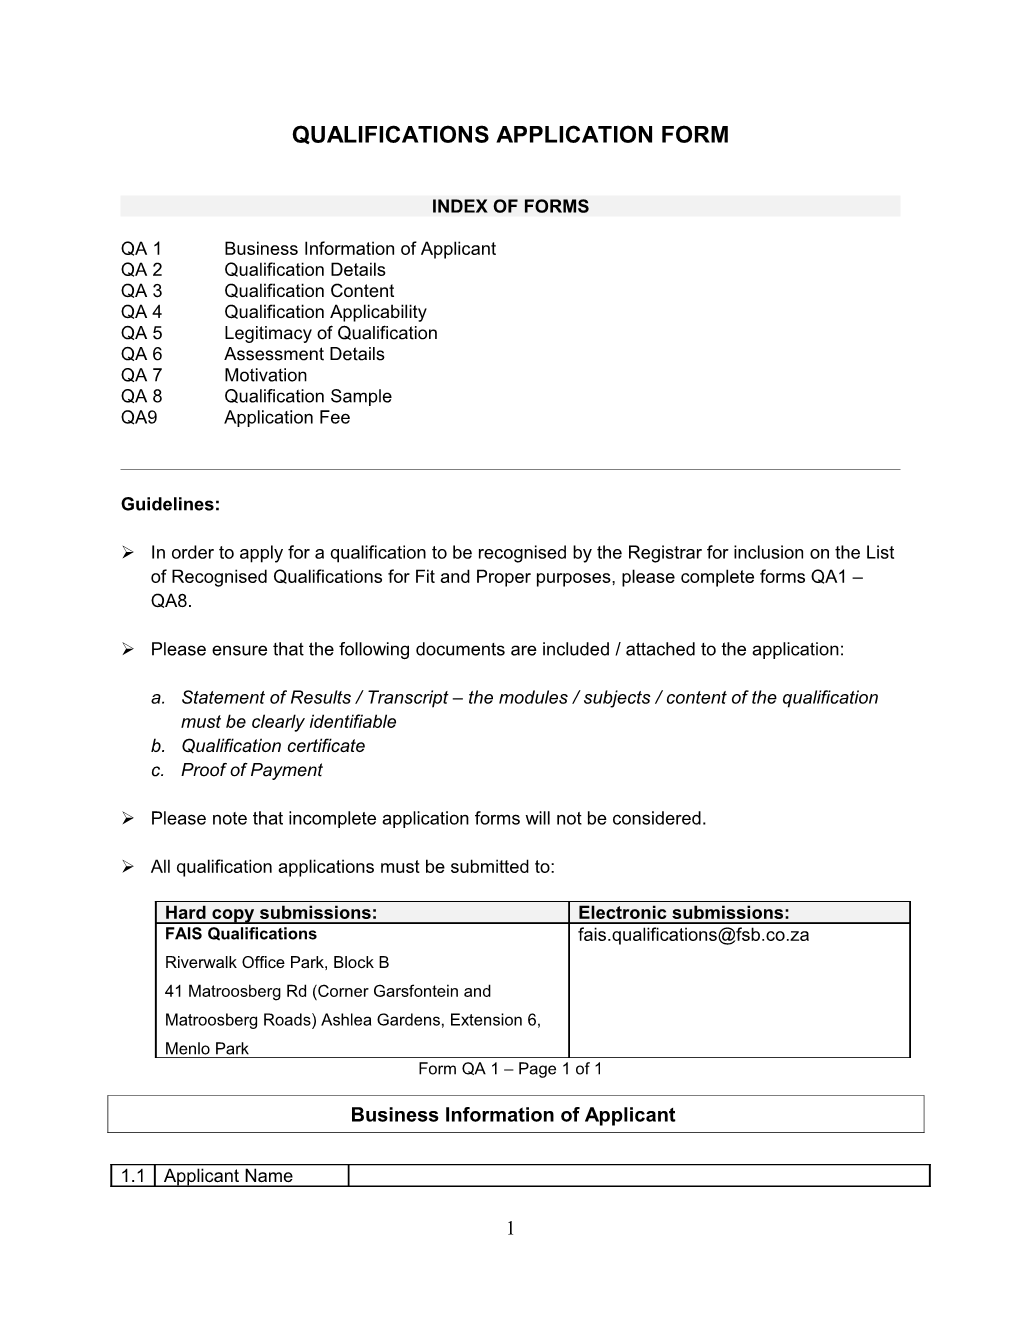 Qualifications Application Form